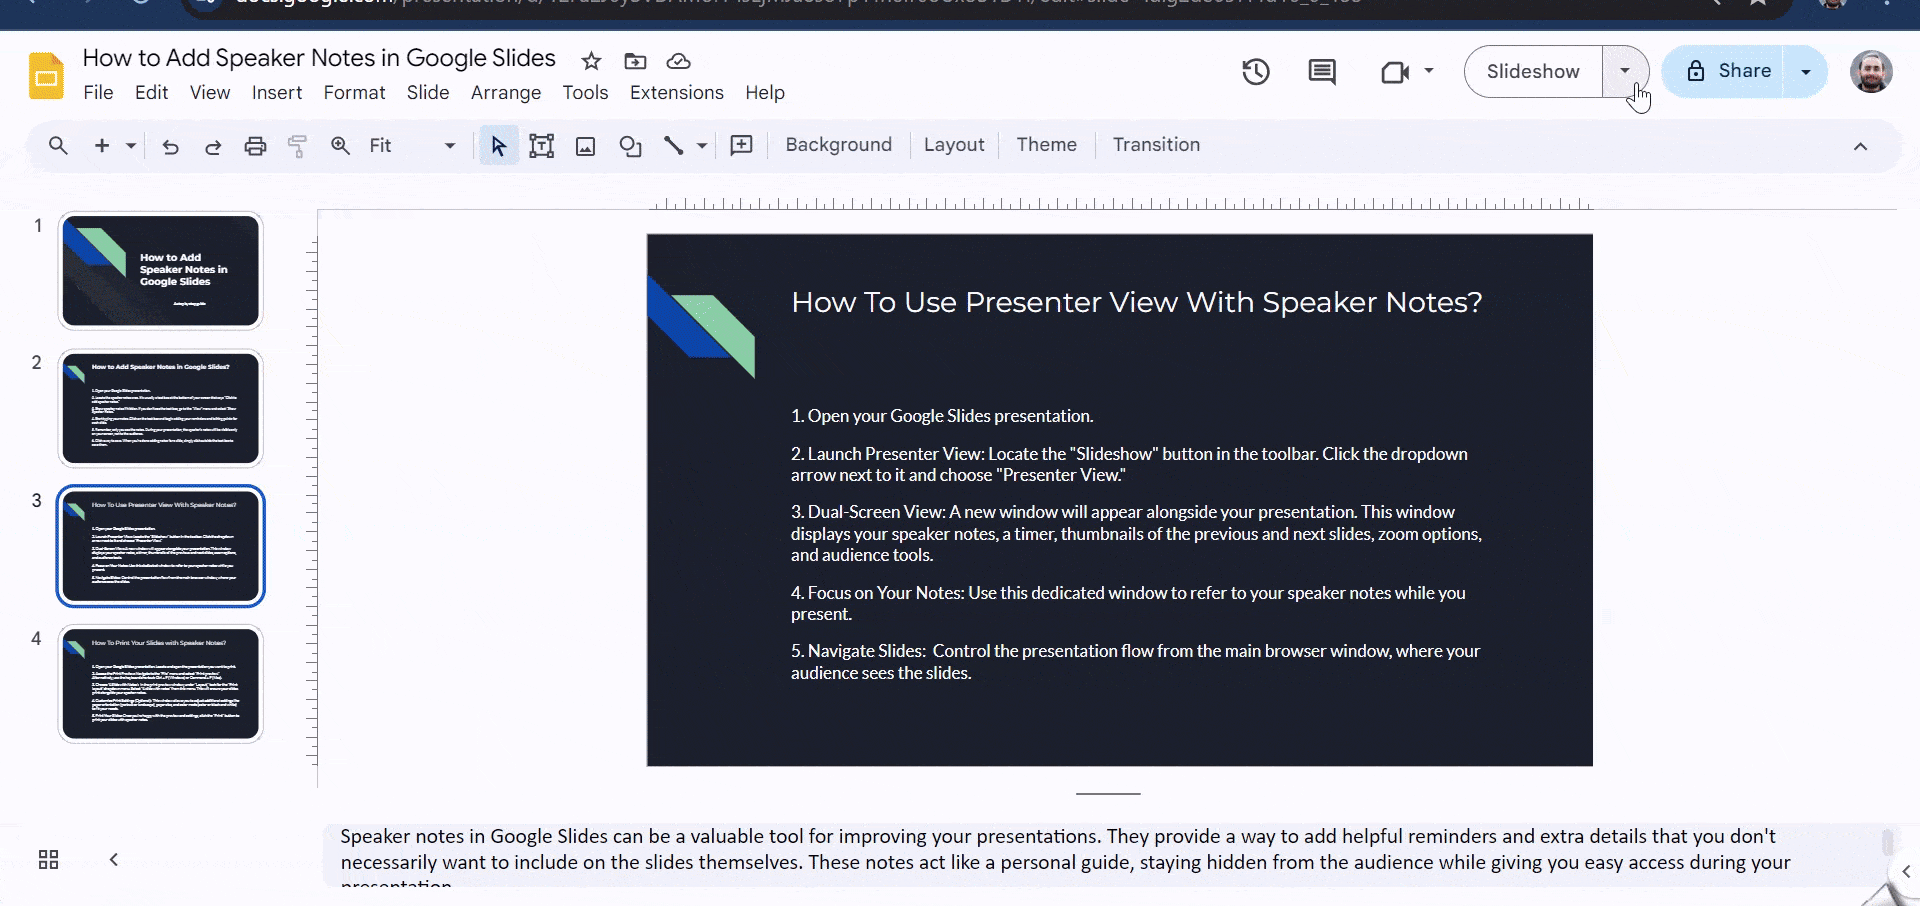 How To Use Presenter View With Speaker Notes?